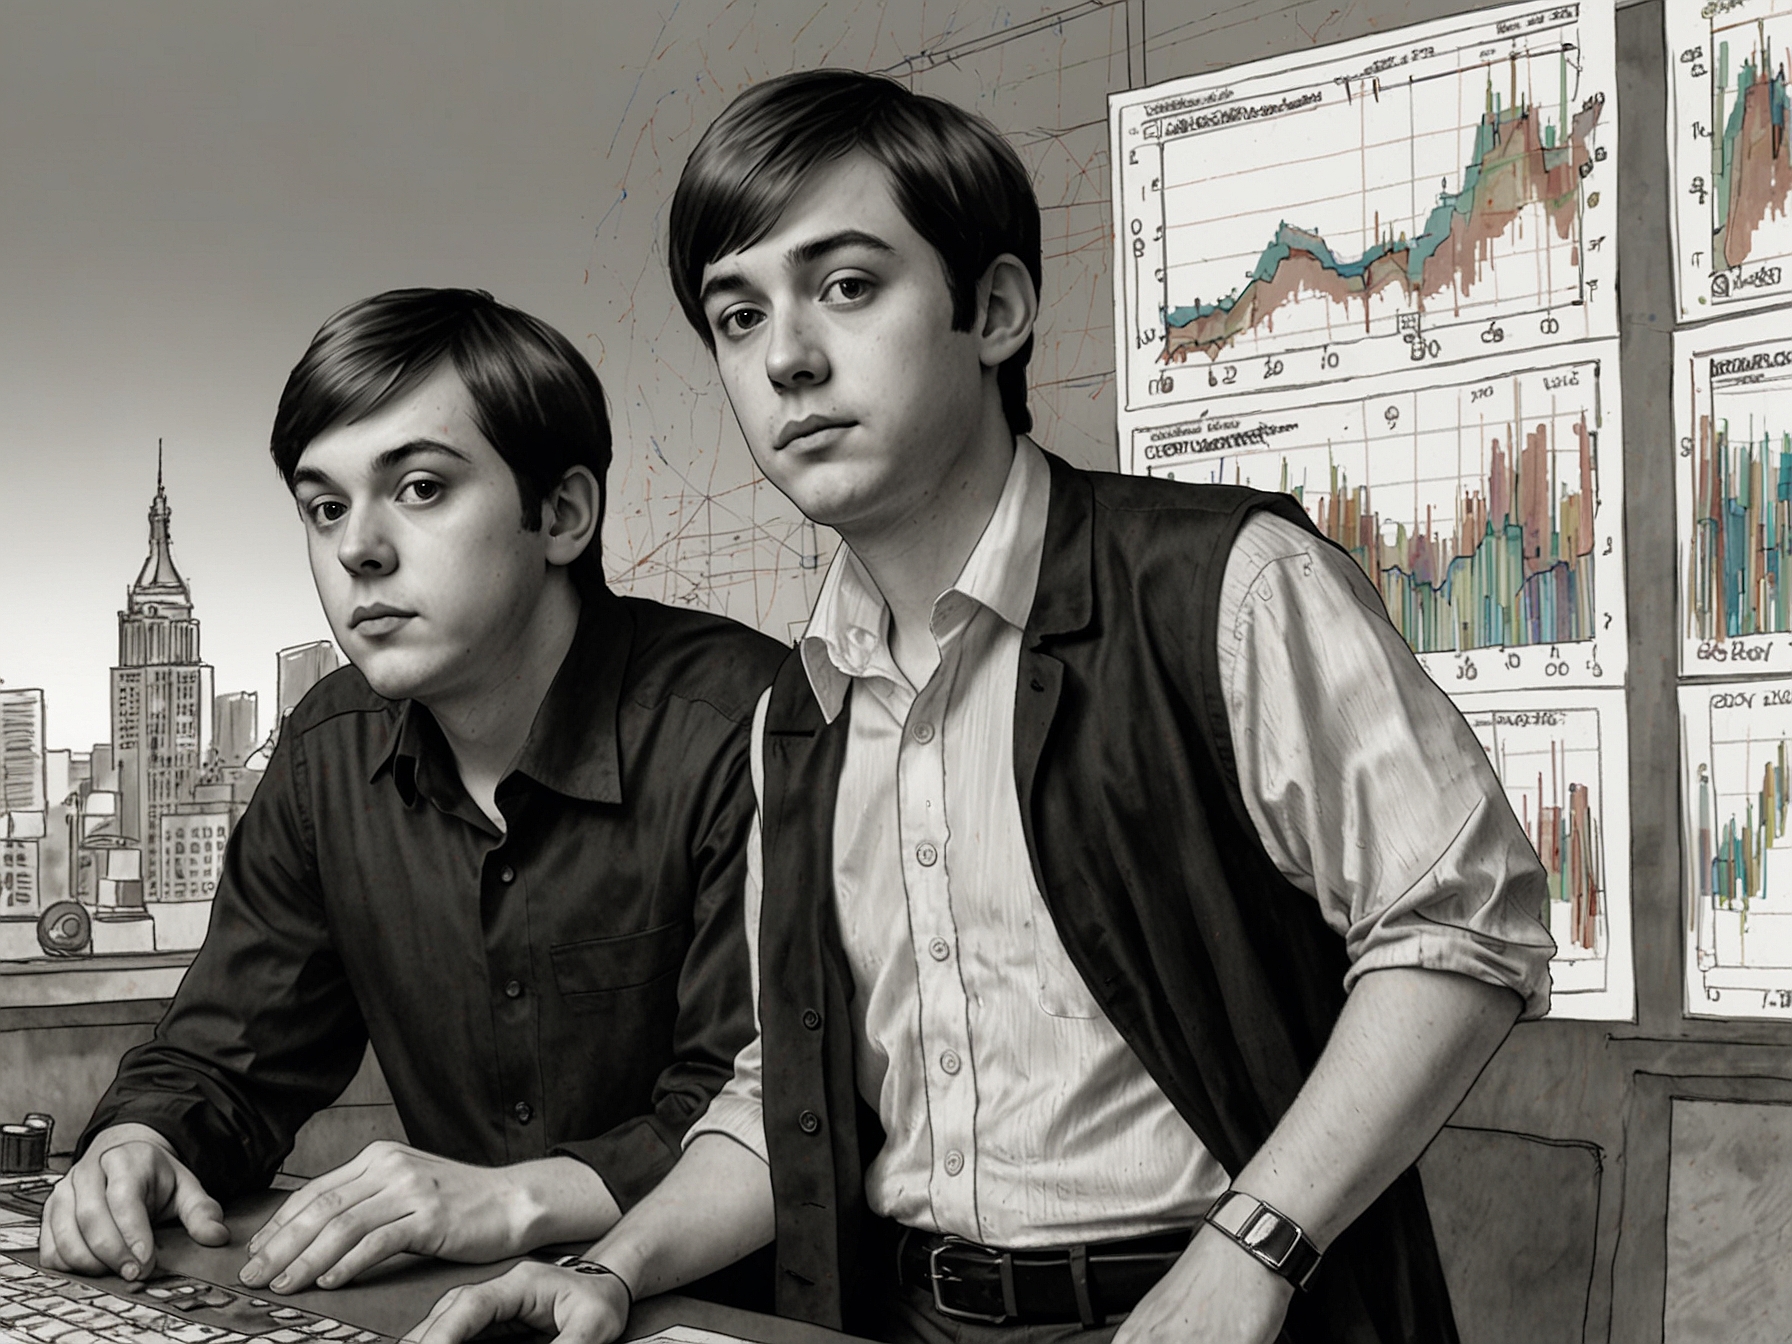 An illustration of Martin Shkreli and Barron Trump in front of a fluctuating cryptocurrency graph, symbolizing the volatility and speculation-driven surge in DJT TrumpCoin's value.